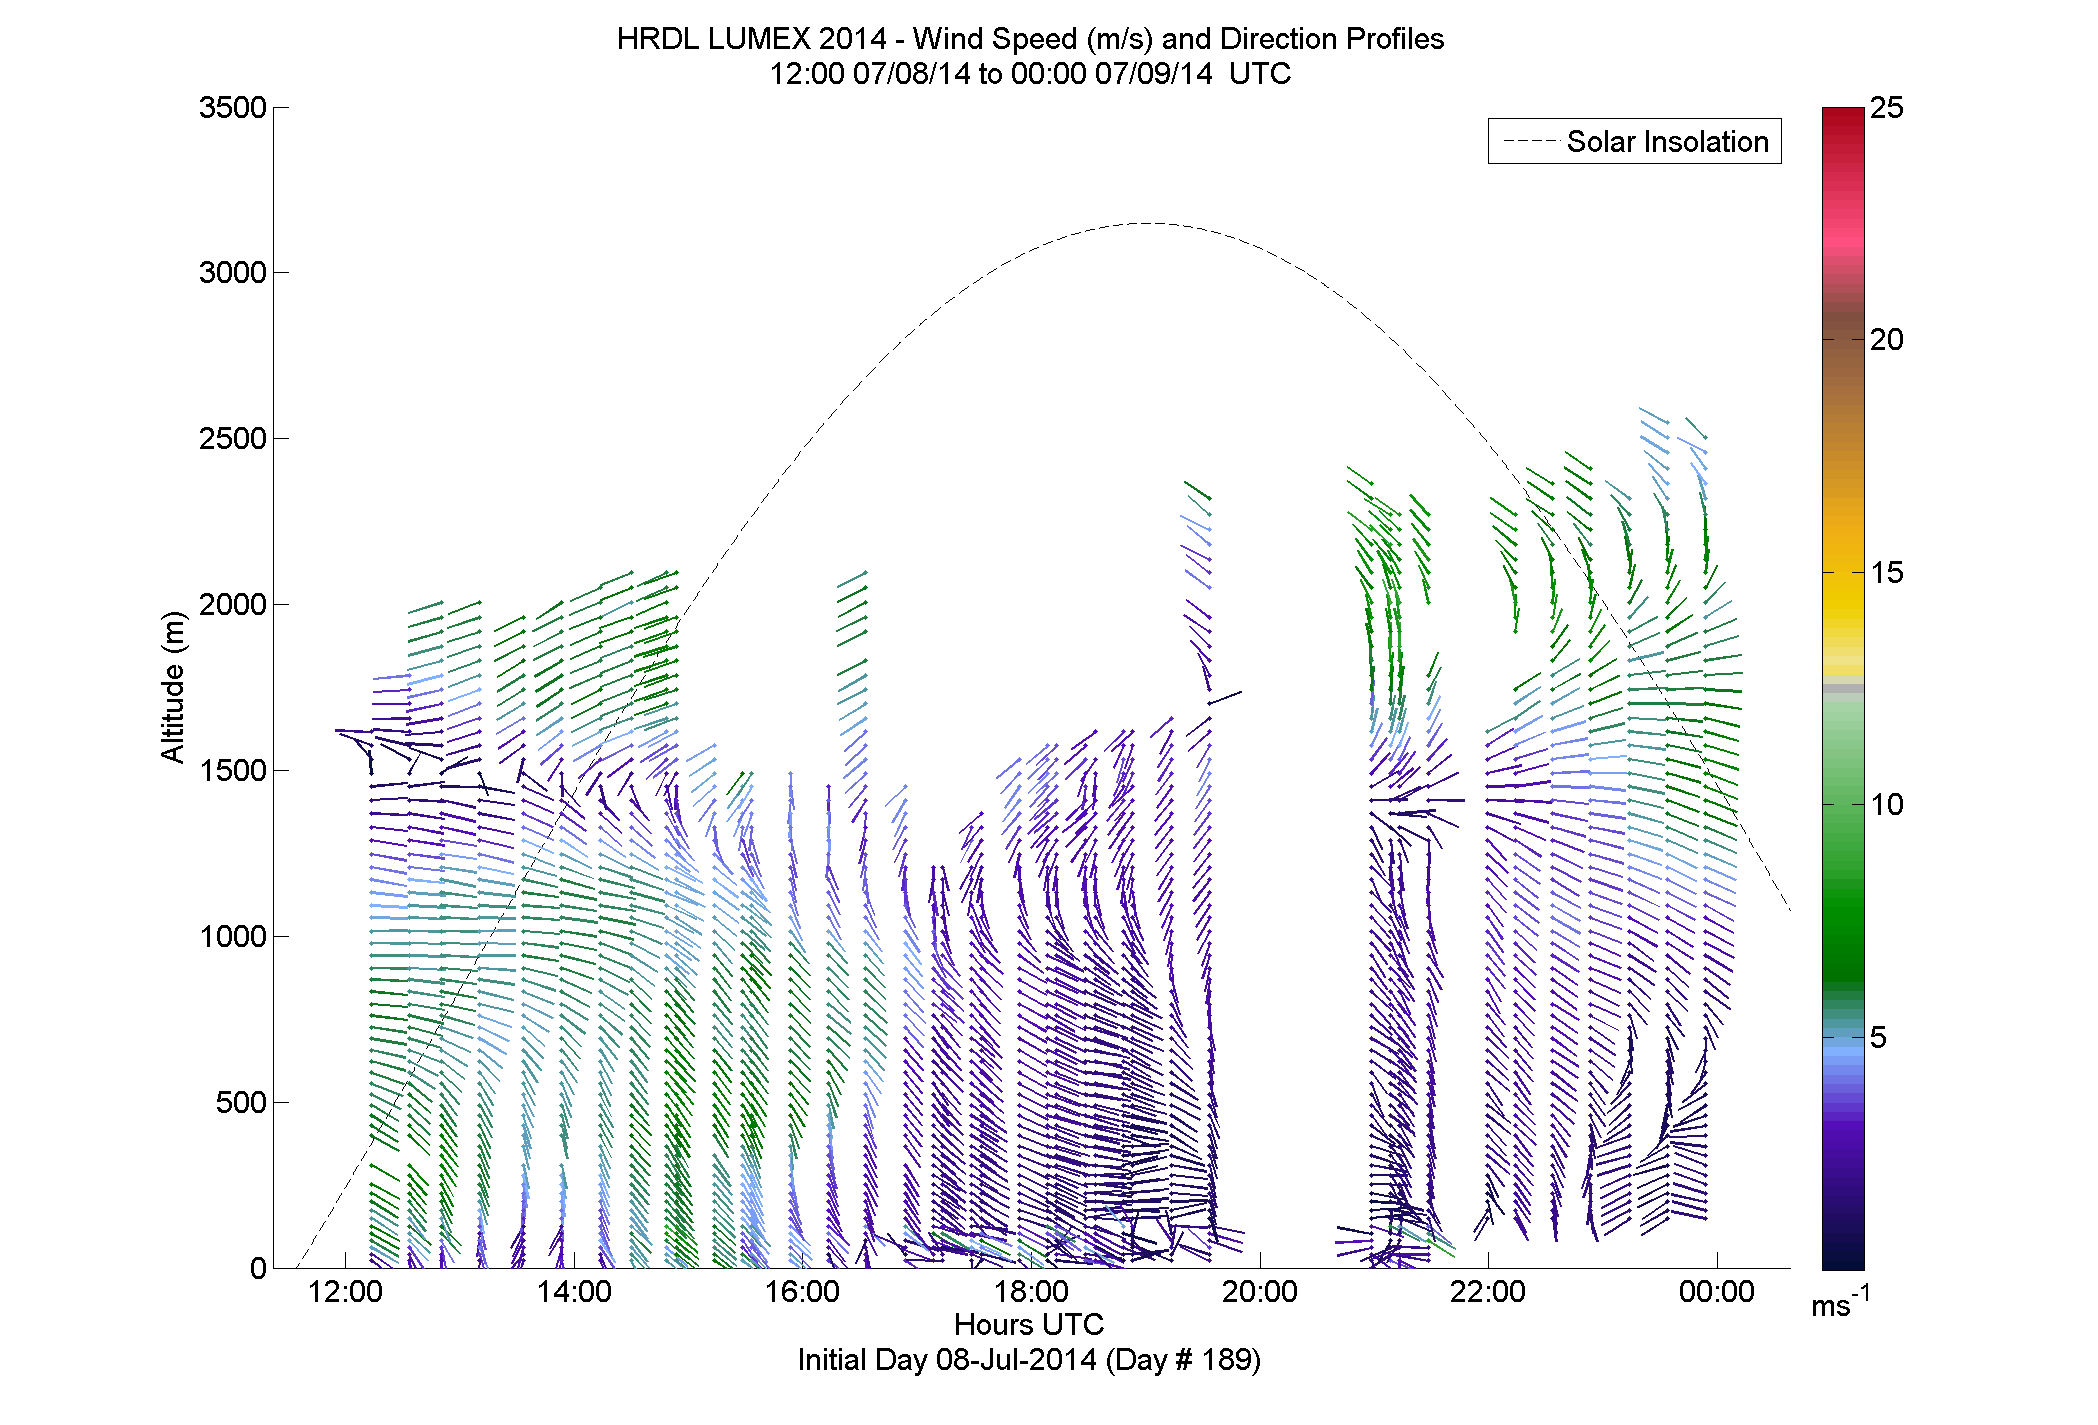 HRDL speed and direction profile - July 8 pm